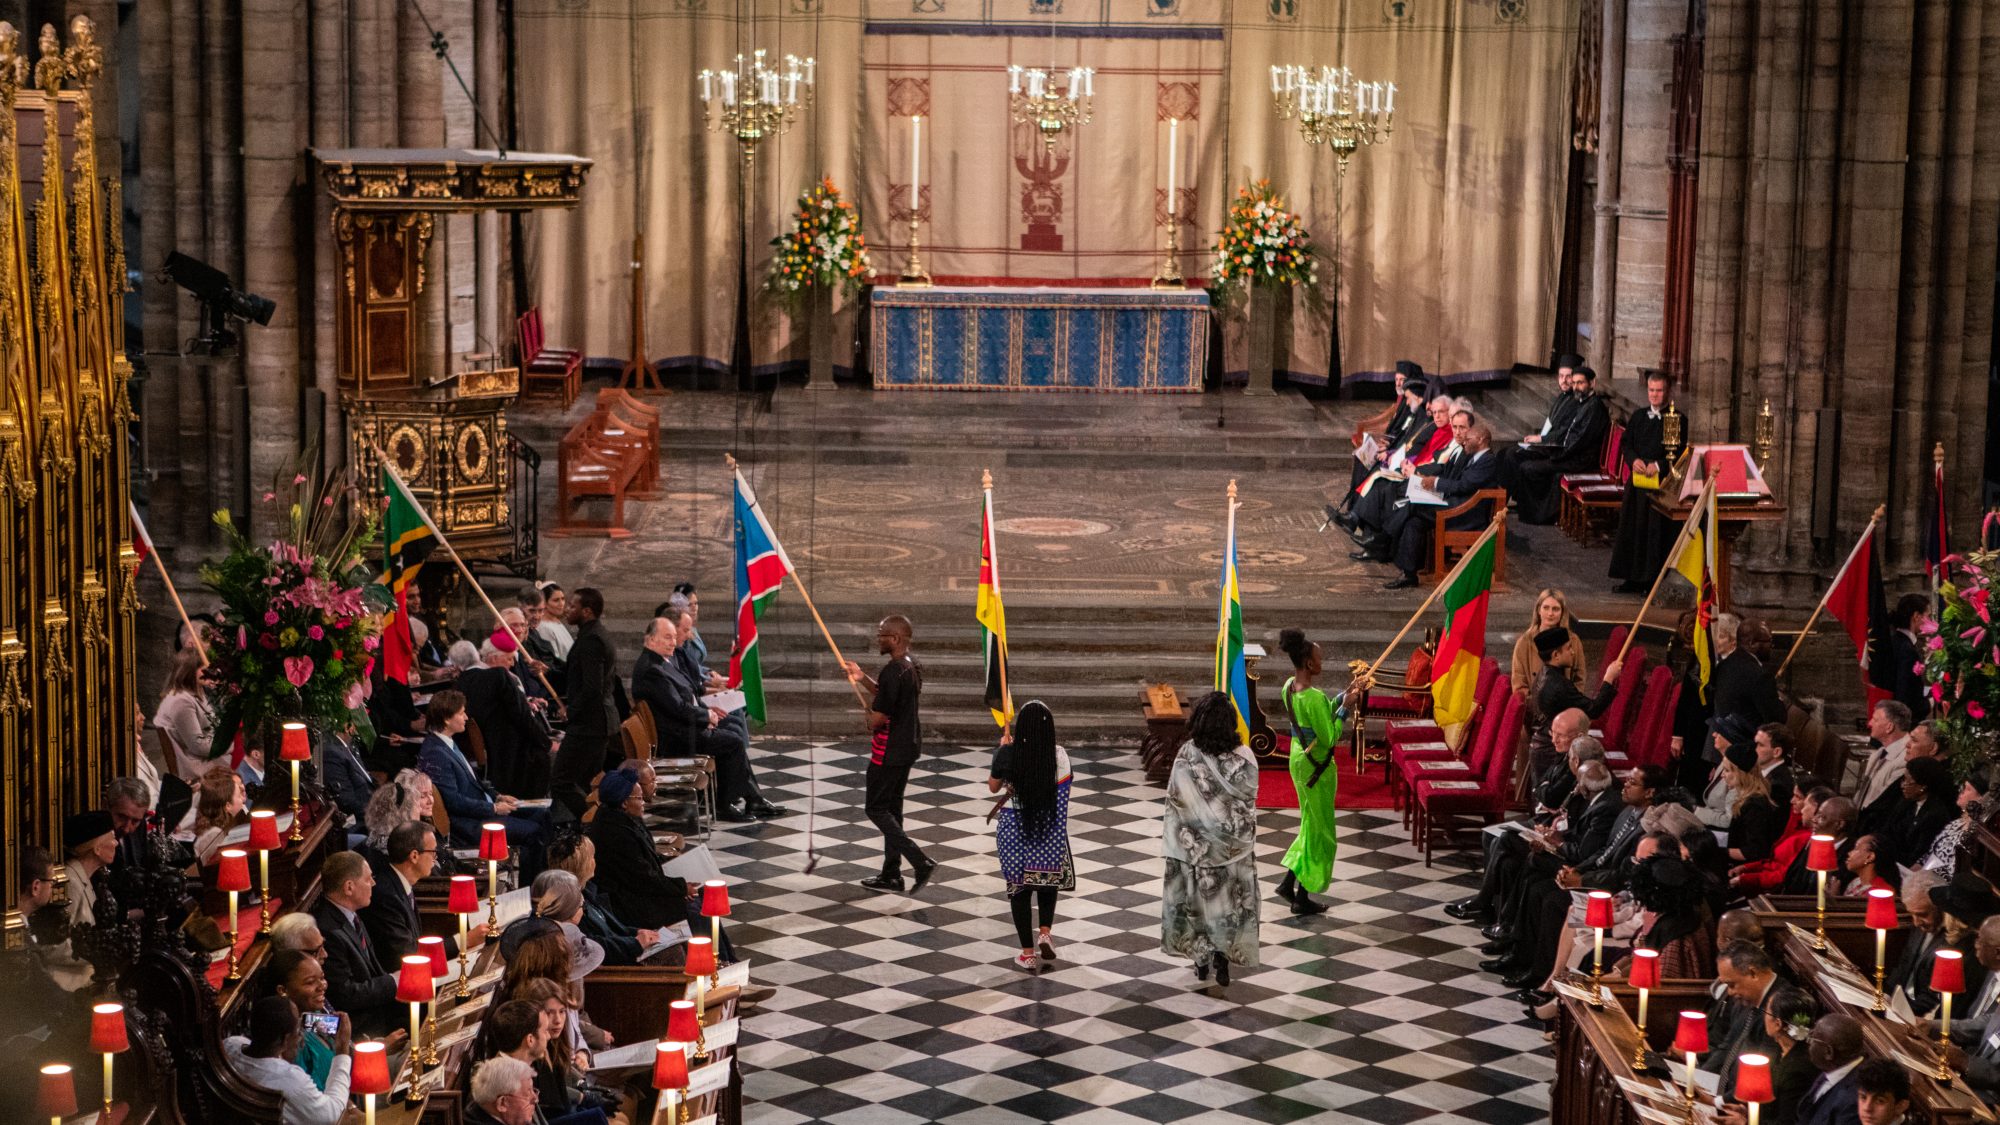 Westminster Abbey on Twitter "Today is CommonwealthDay, when we